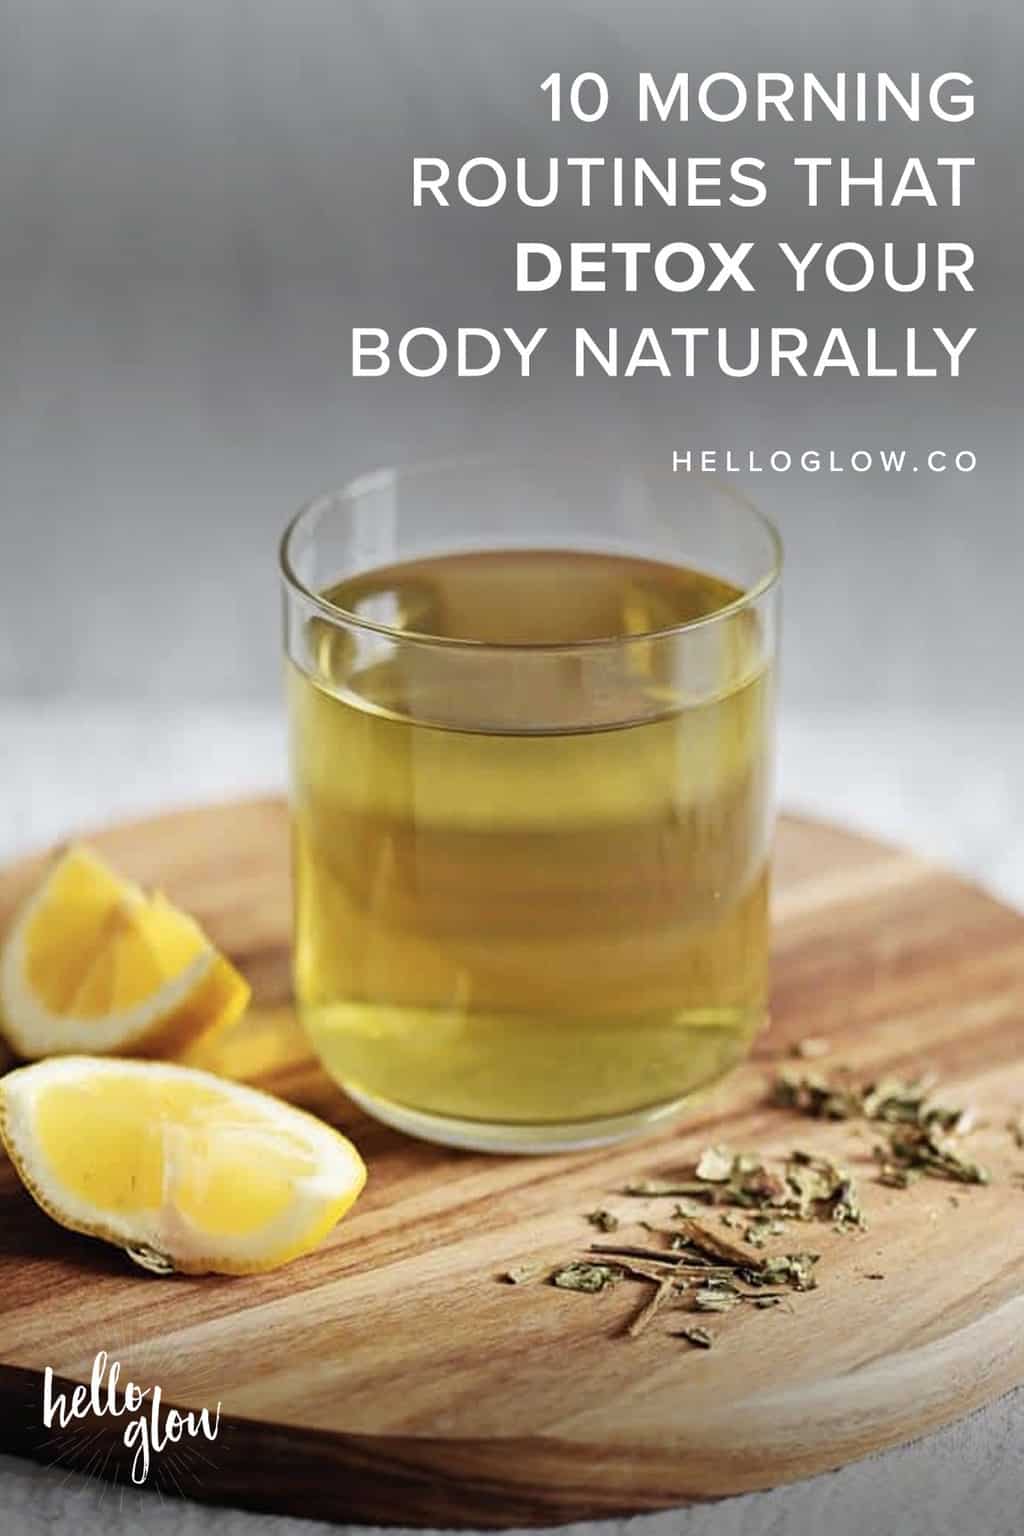 10 Morning Routines that Detox Your Body Naturally - HelloGlow.co